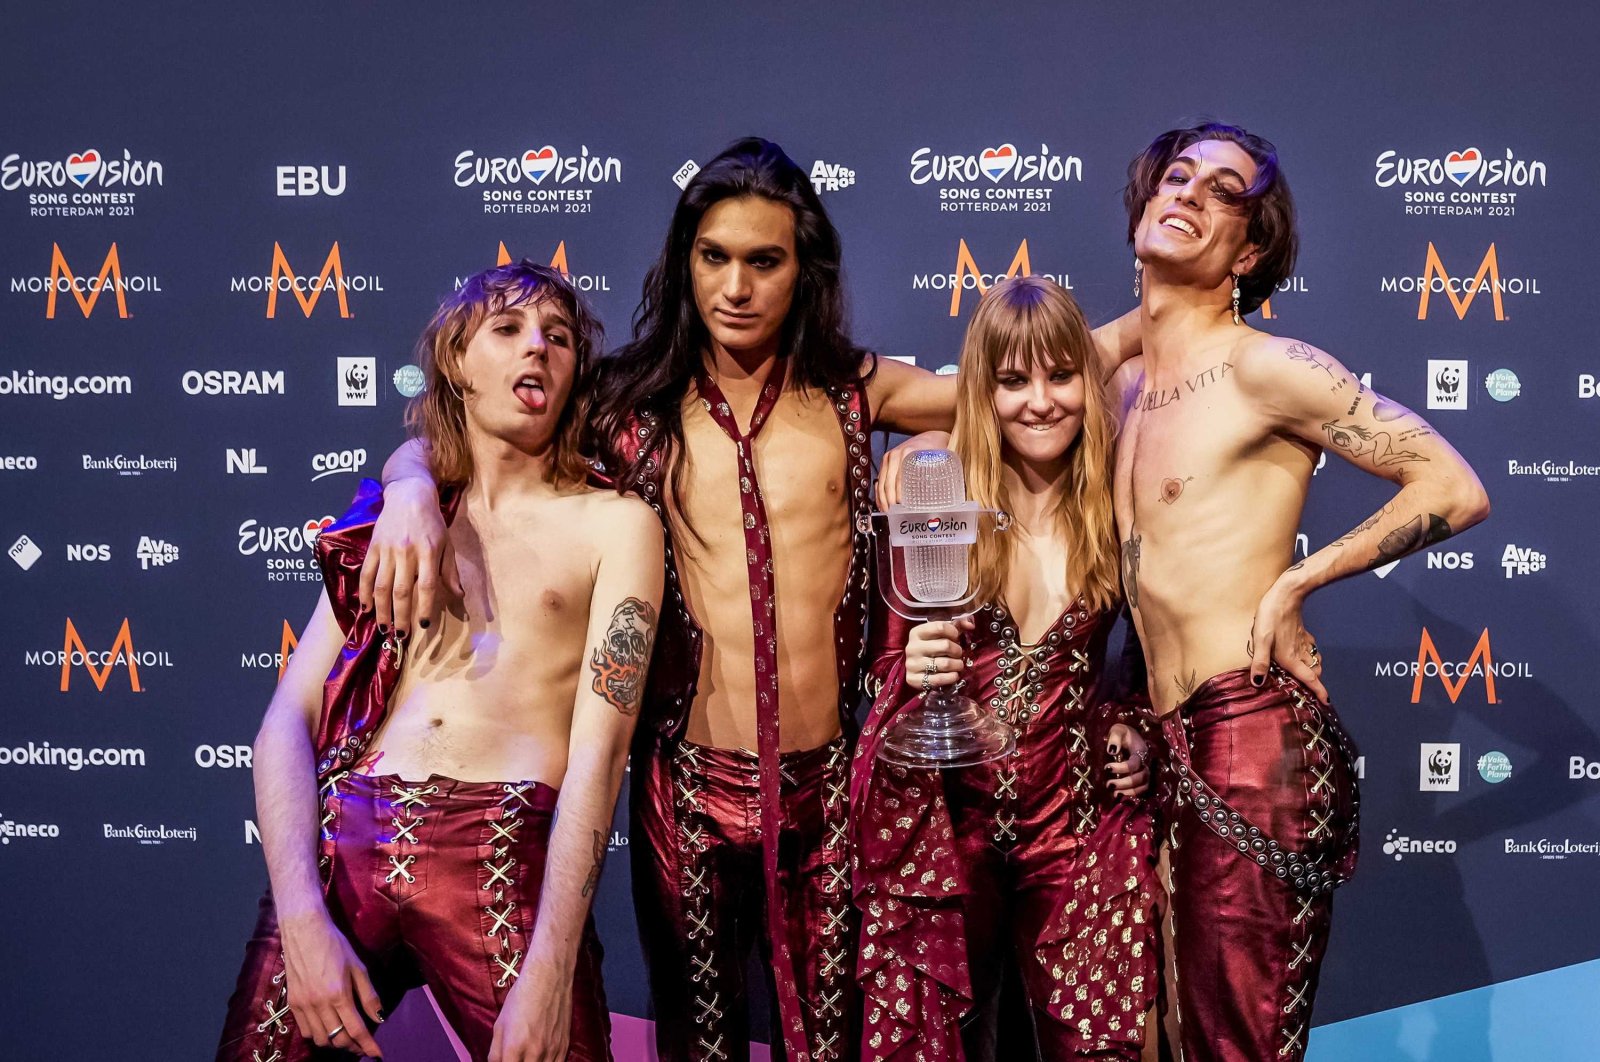 Maneskin from Italy poses for photographs during a press conference after winning the Grand Final of the 65th annual Eurovision Song Contest (ESC) at the Rotterdam Ahoy arena, in Rotterdam, The Netherlands, May 22, 2021. (EPA Photo)